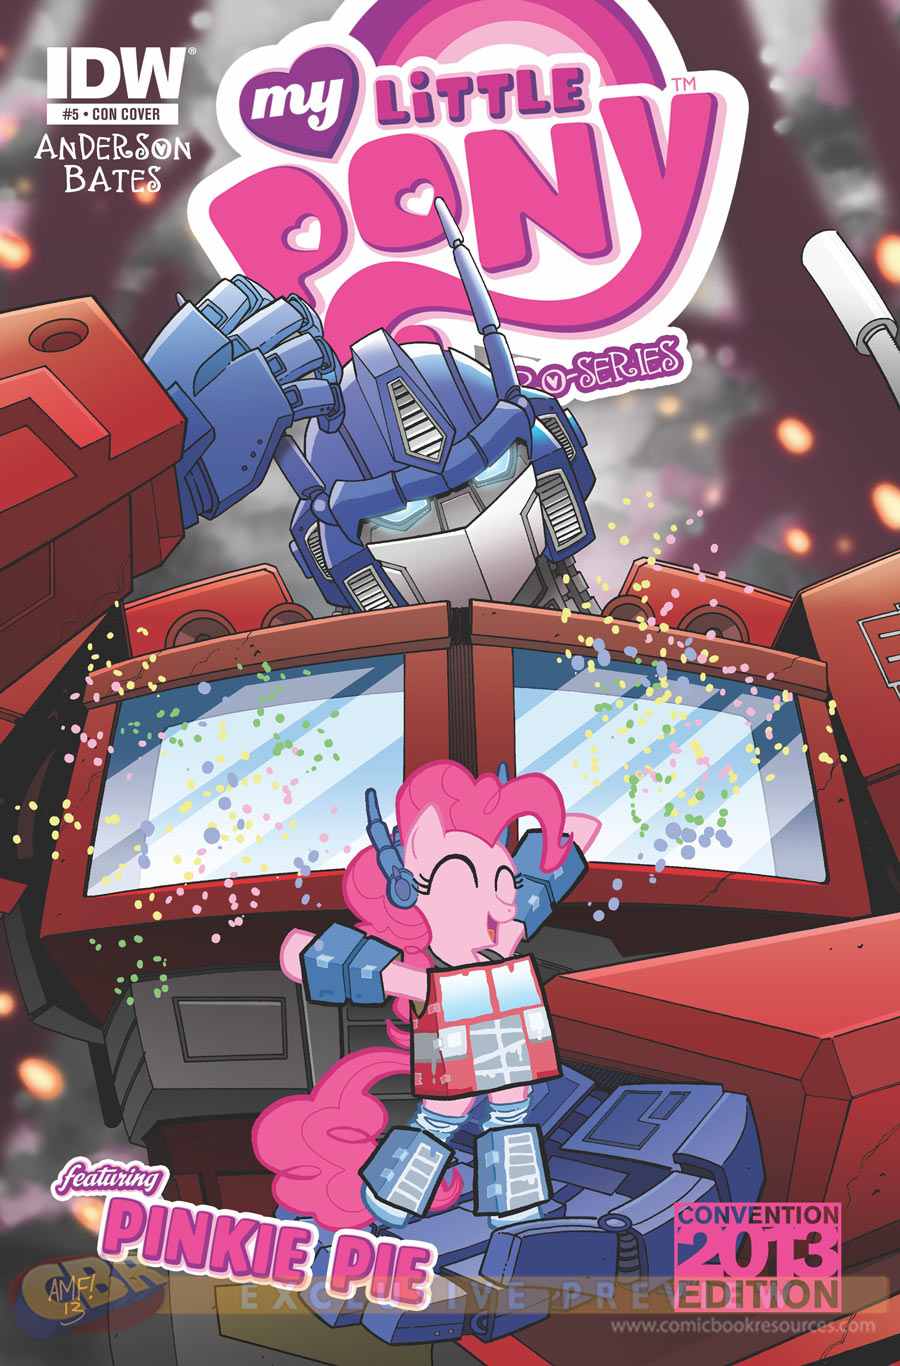 VERY RARE! IDW MY LITTLE PONY MICRO-SERIES #5 PINKIE PIE CON COVER NM 